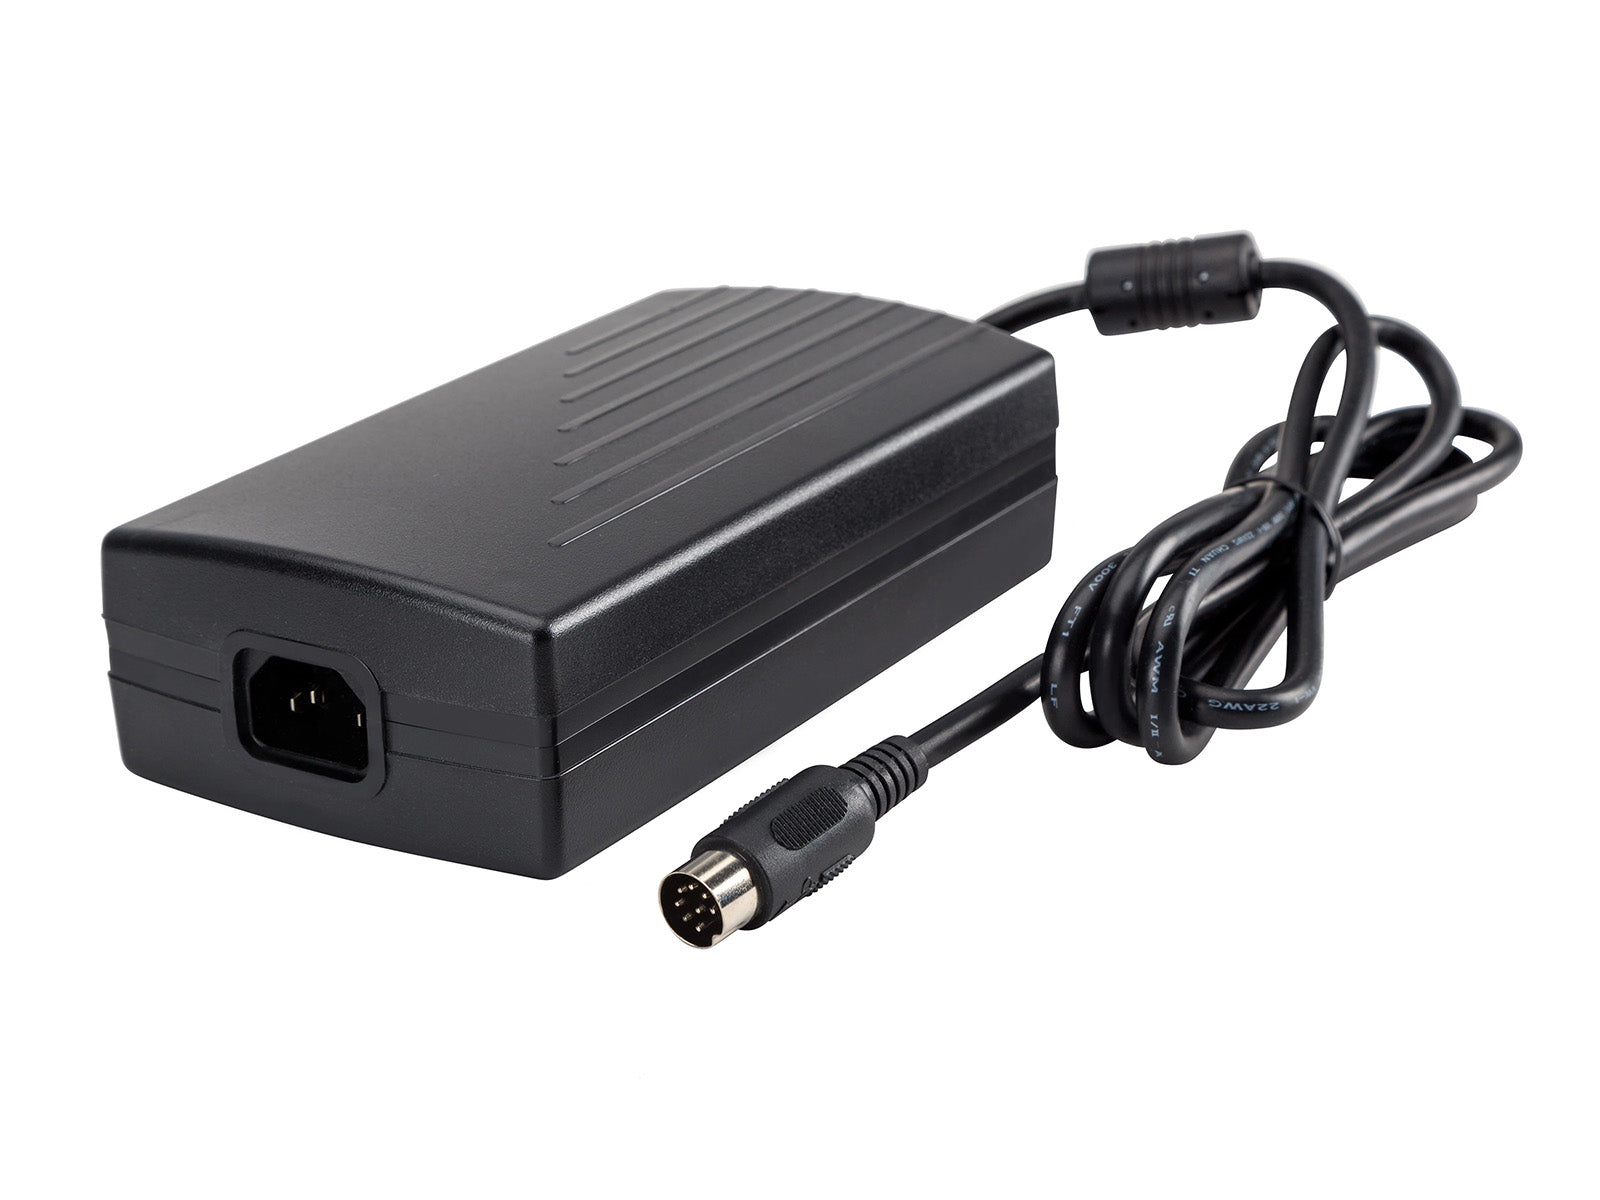 Skynet Electronic SNP-A127-M 12V 9A Power Supply AC Adapter for Barco Medical Monitors (SNP-A127-M) Monitors.com 